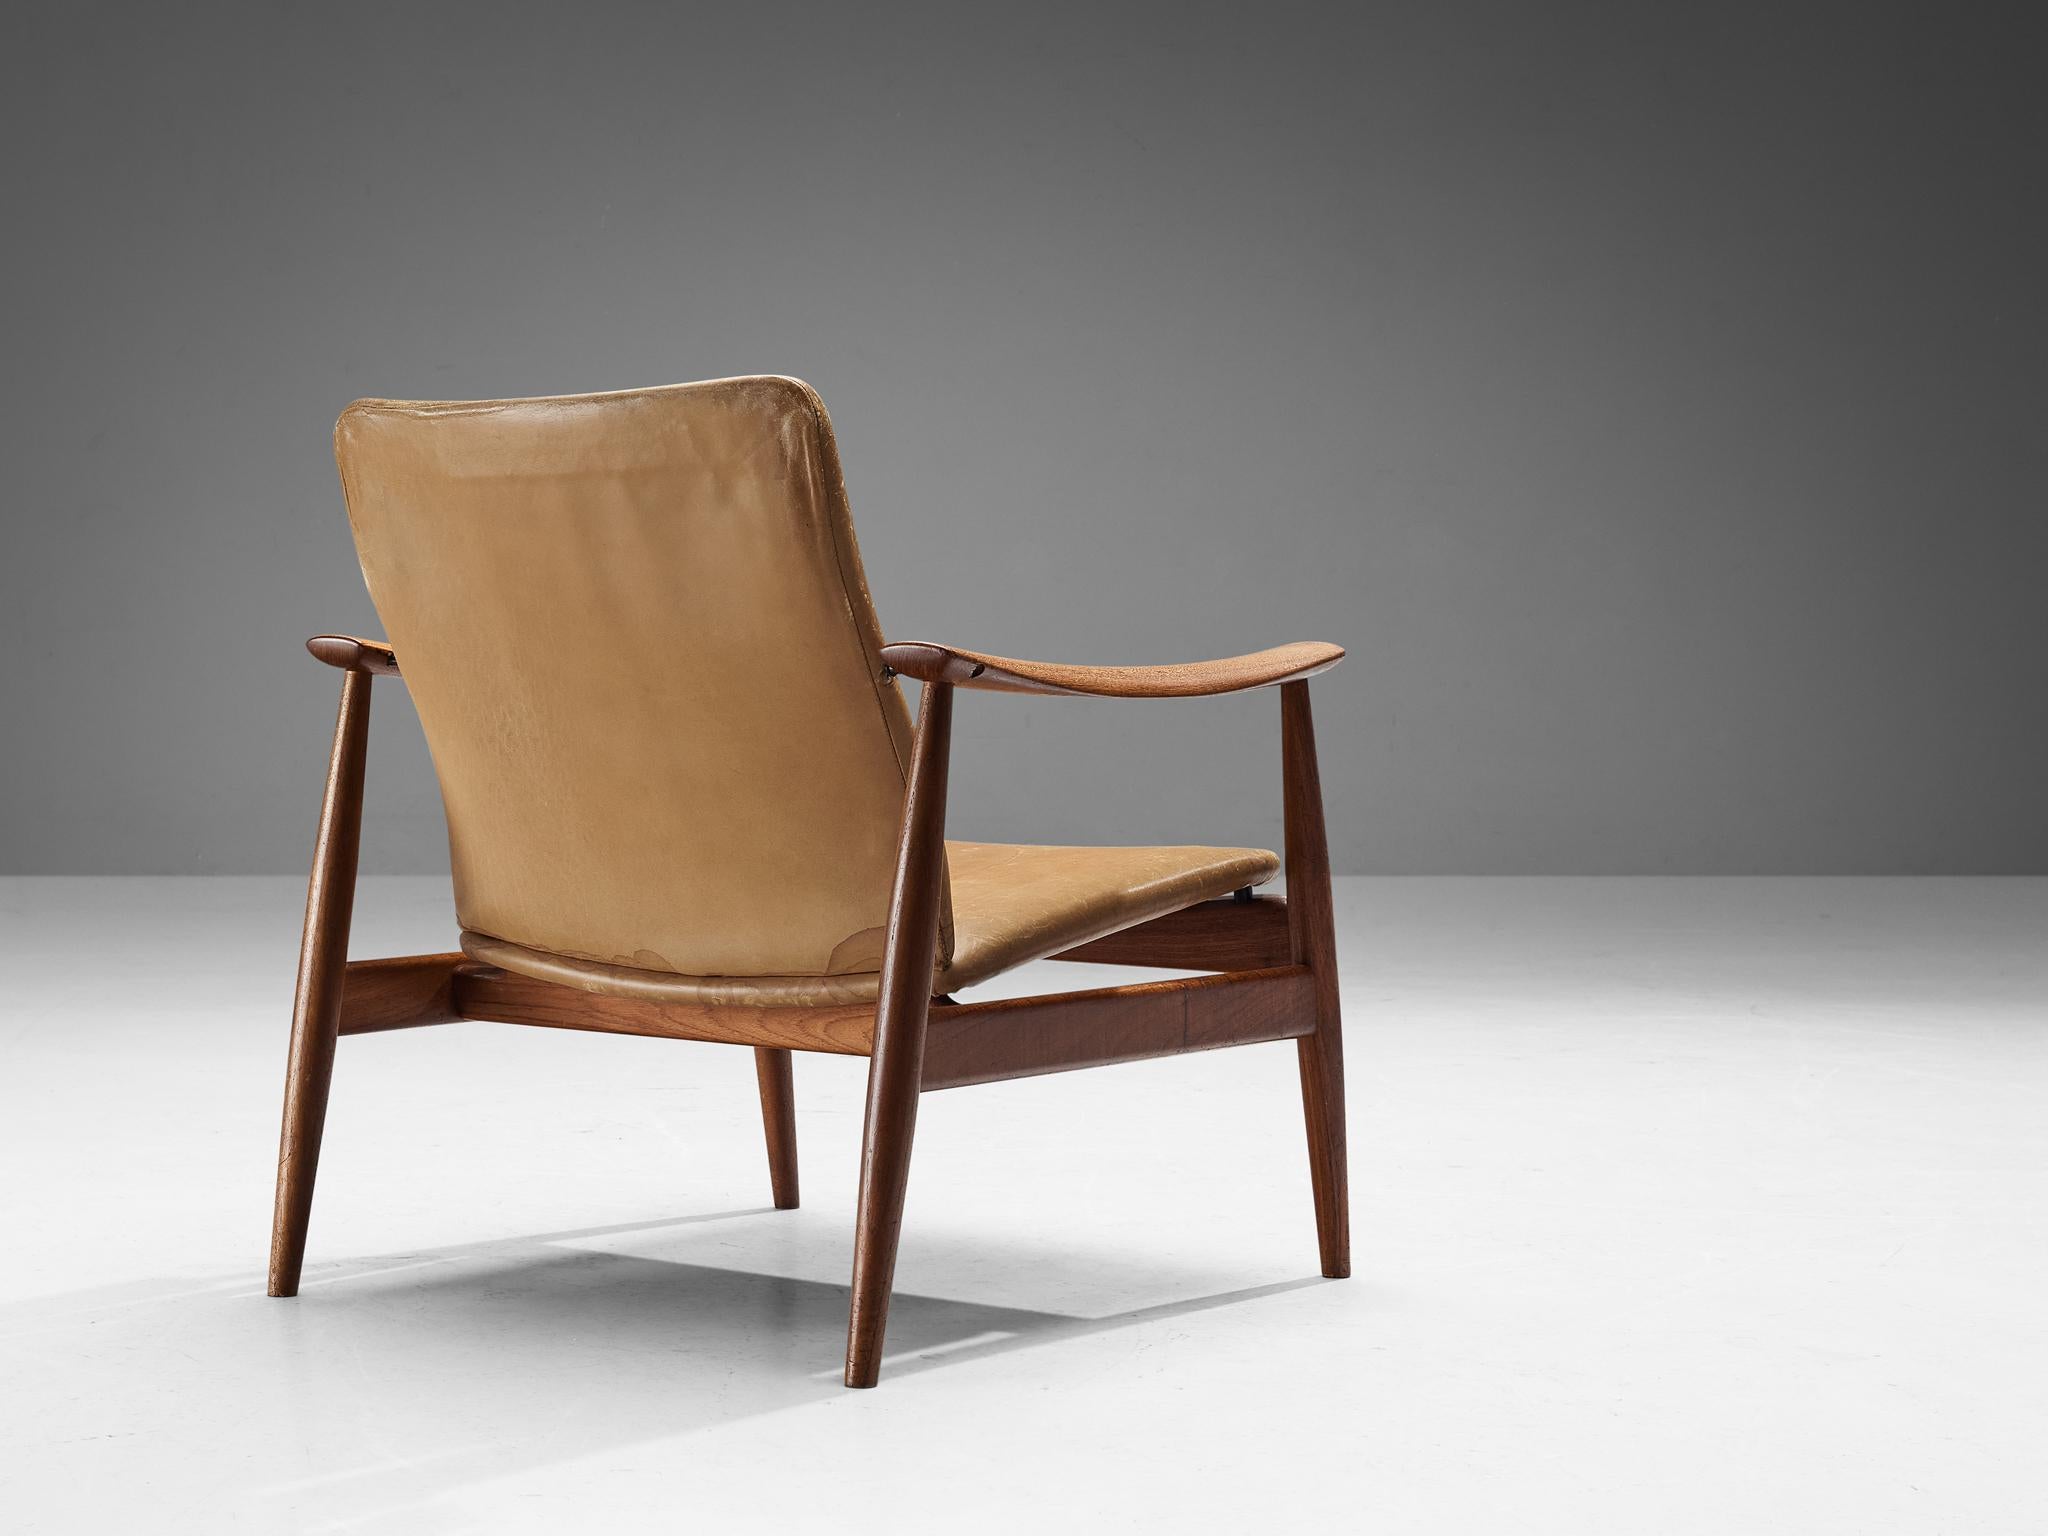 Mid-20th Century Finn Juhl for France & Søn Lounge Chair in Teak and Leather